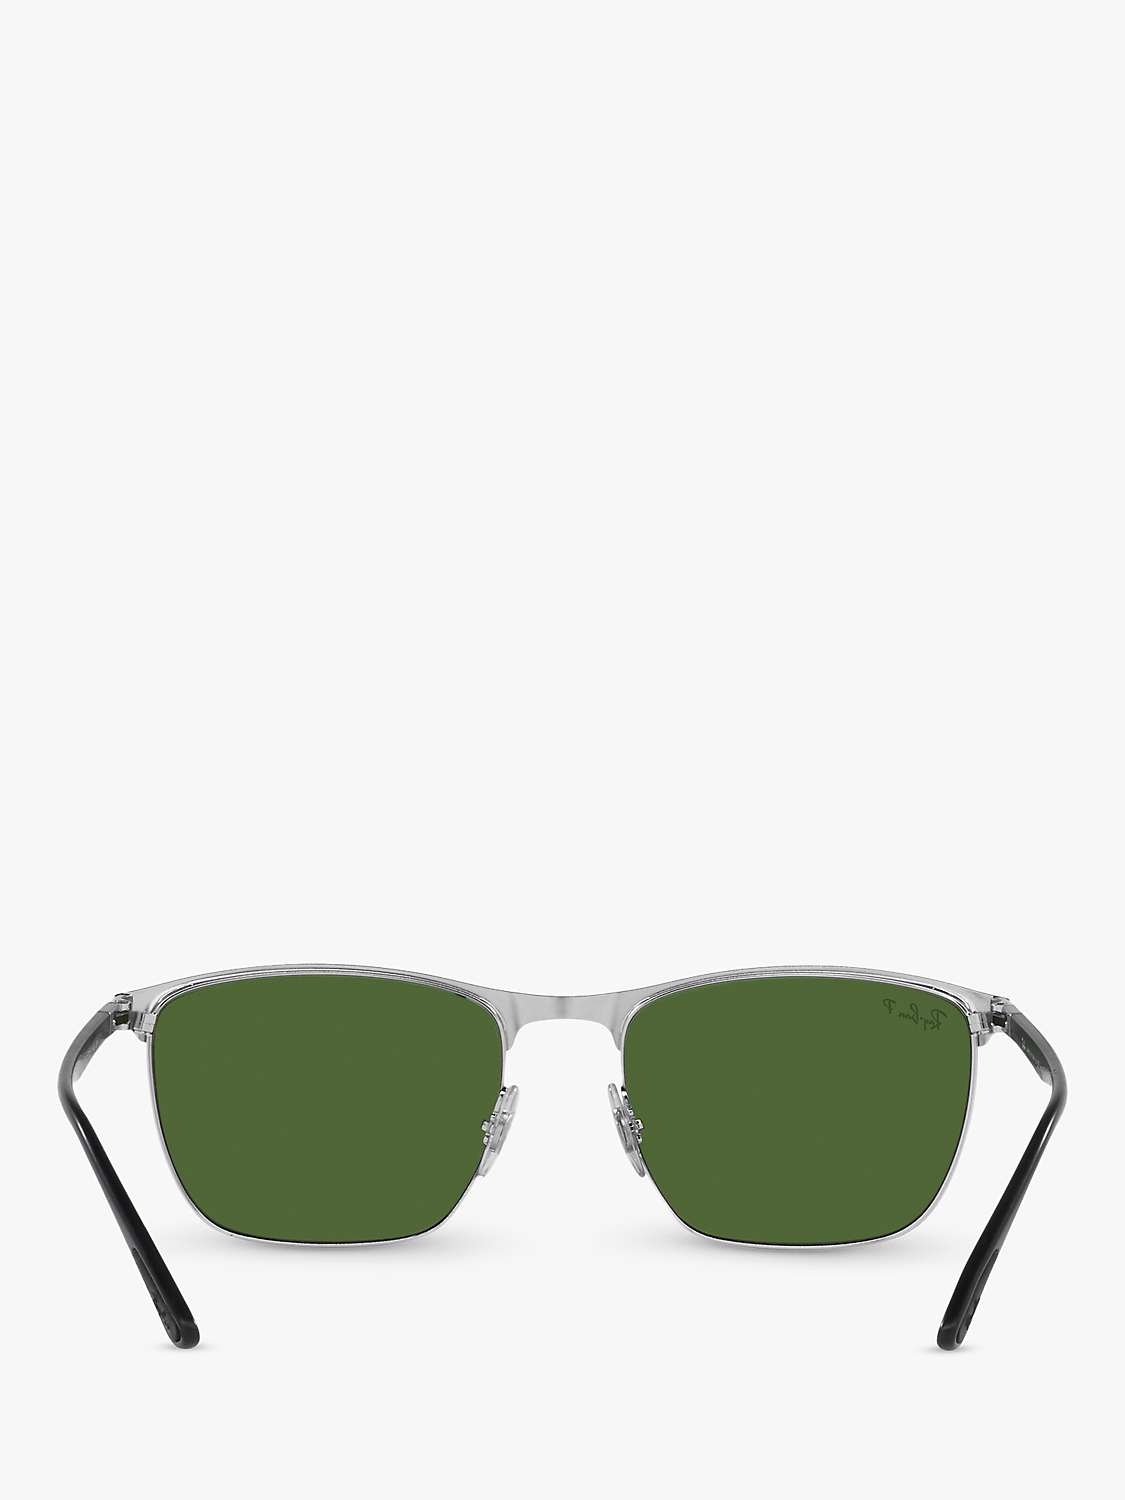 Buy Ray-Ban RB36869 Unisex Polarised Square Sunglasses, Black on Silver/Green Online at johnlewis.com